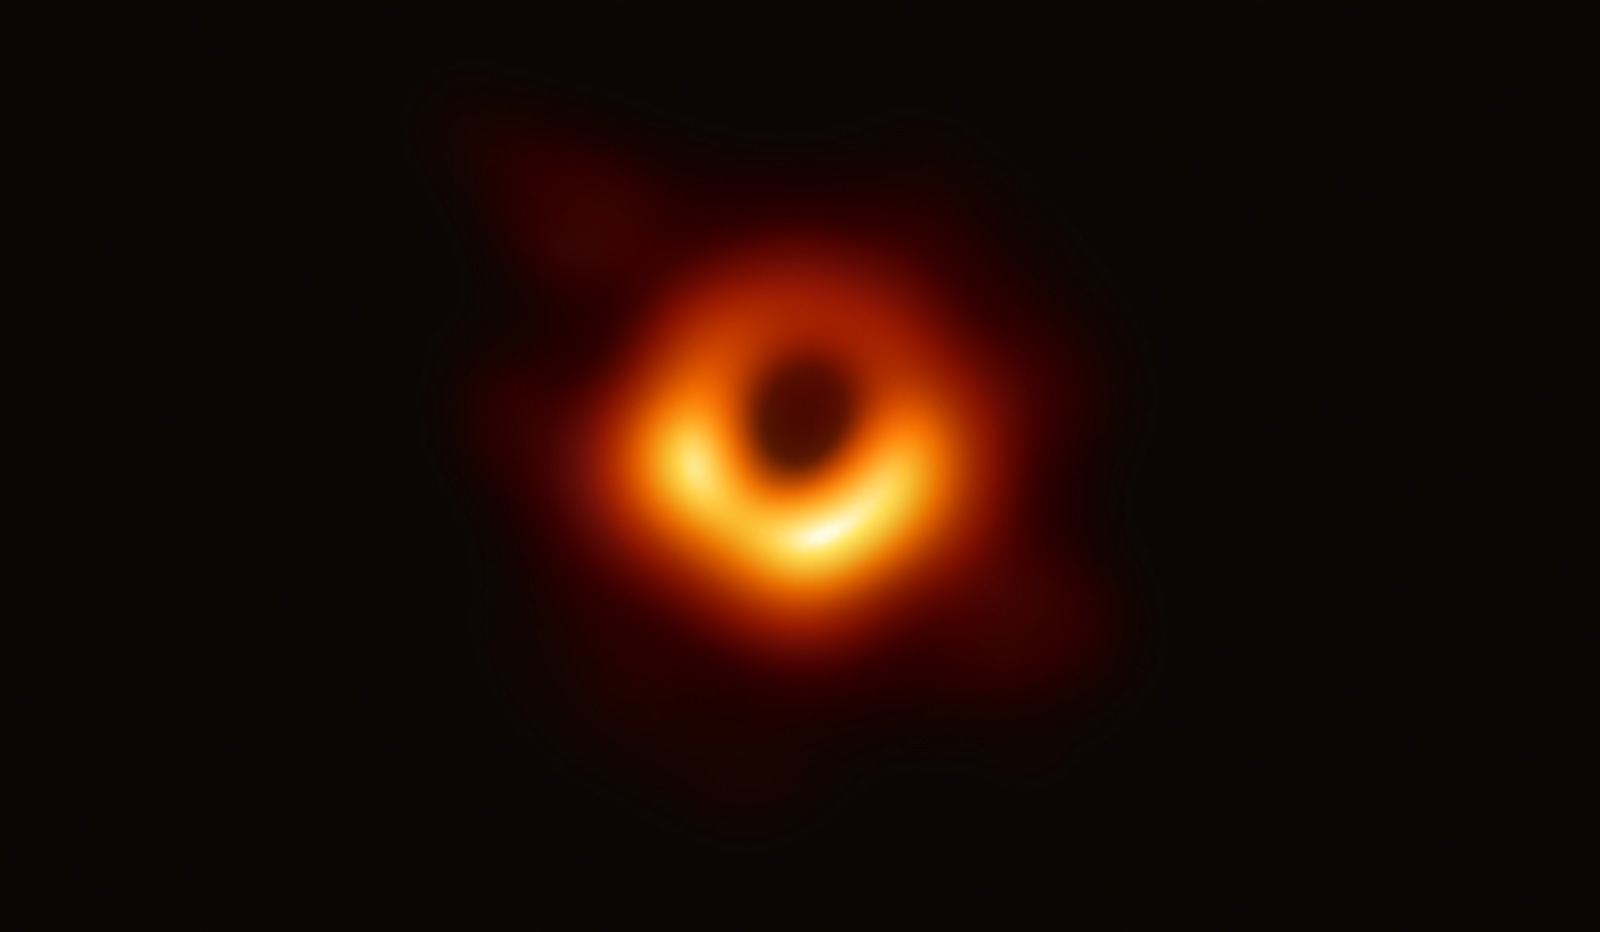 The black hole is outlined by emission from hot gas swirling around it